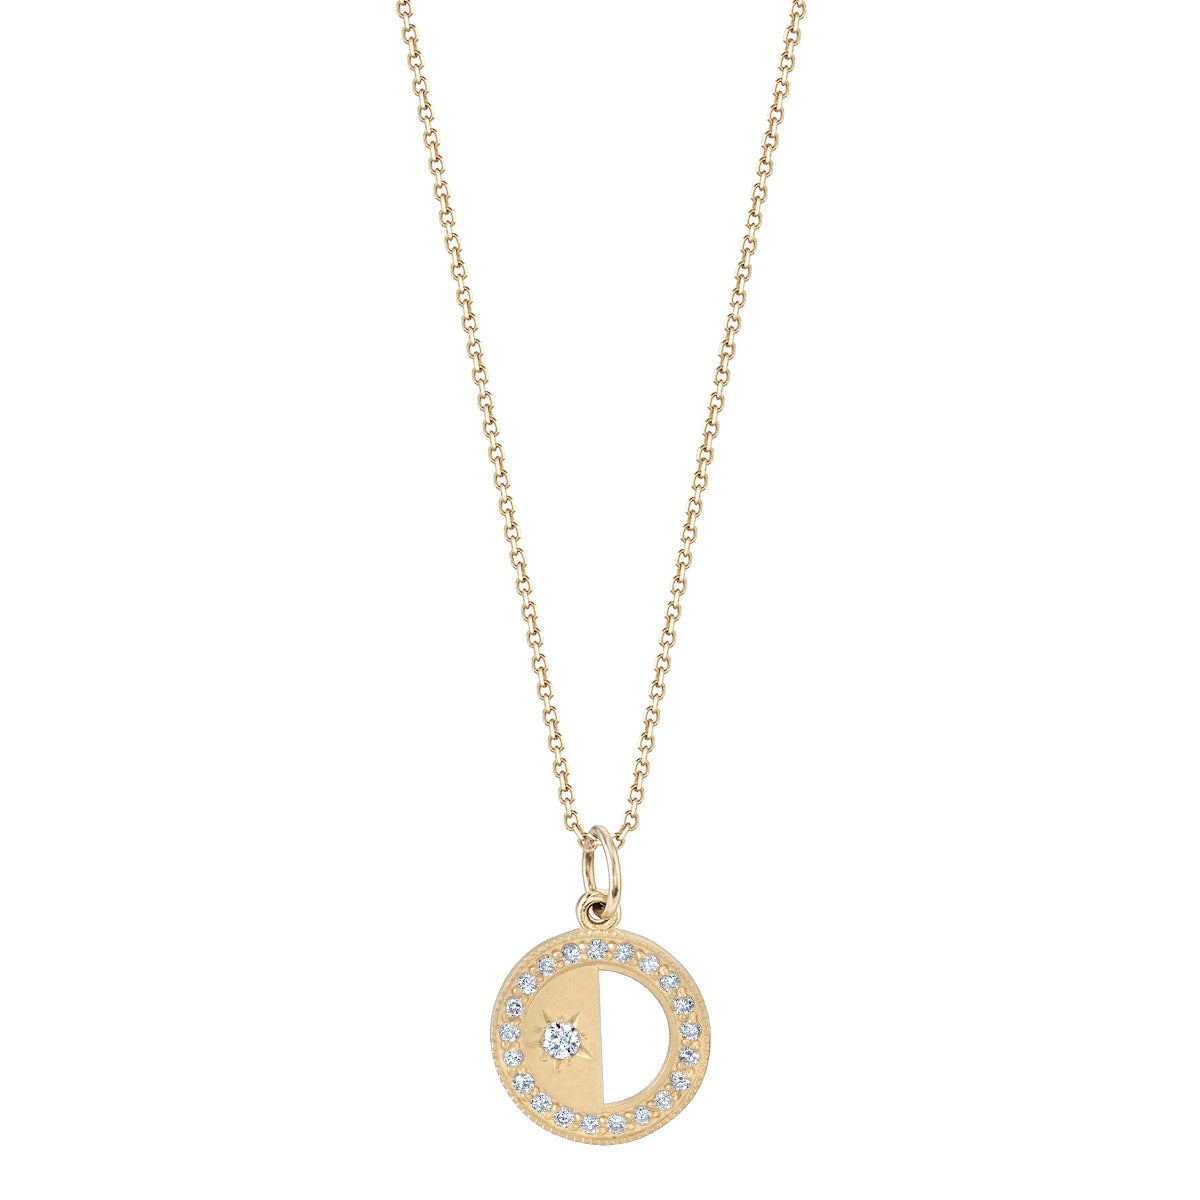 Small First/Last Quarter White Diamond Half Moon Phase Necklace